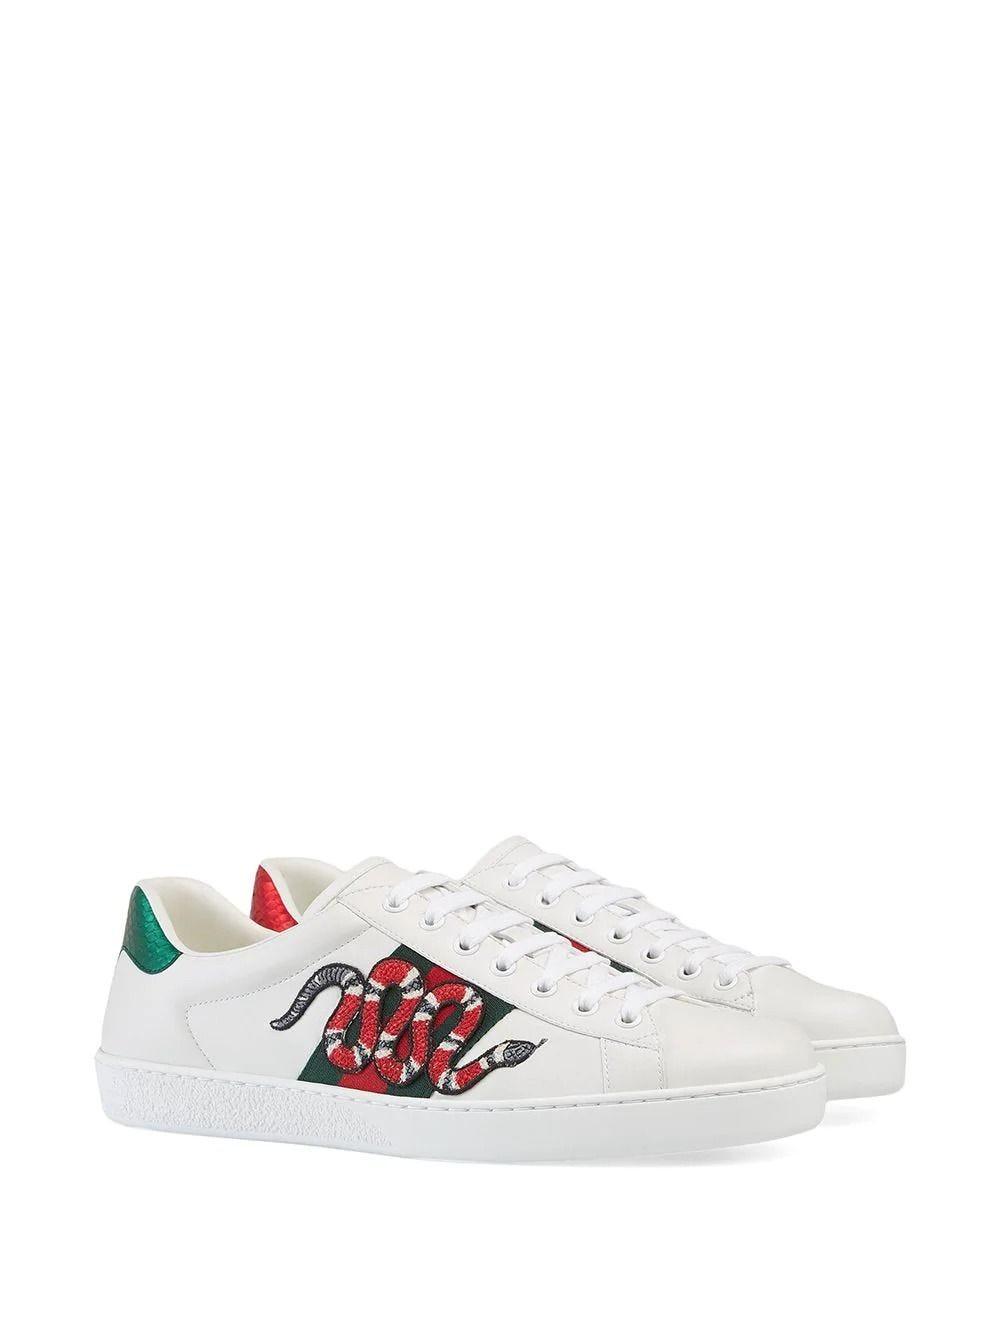 Gucci Snake Ace Embroidered Leather 